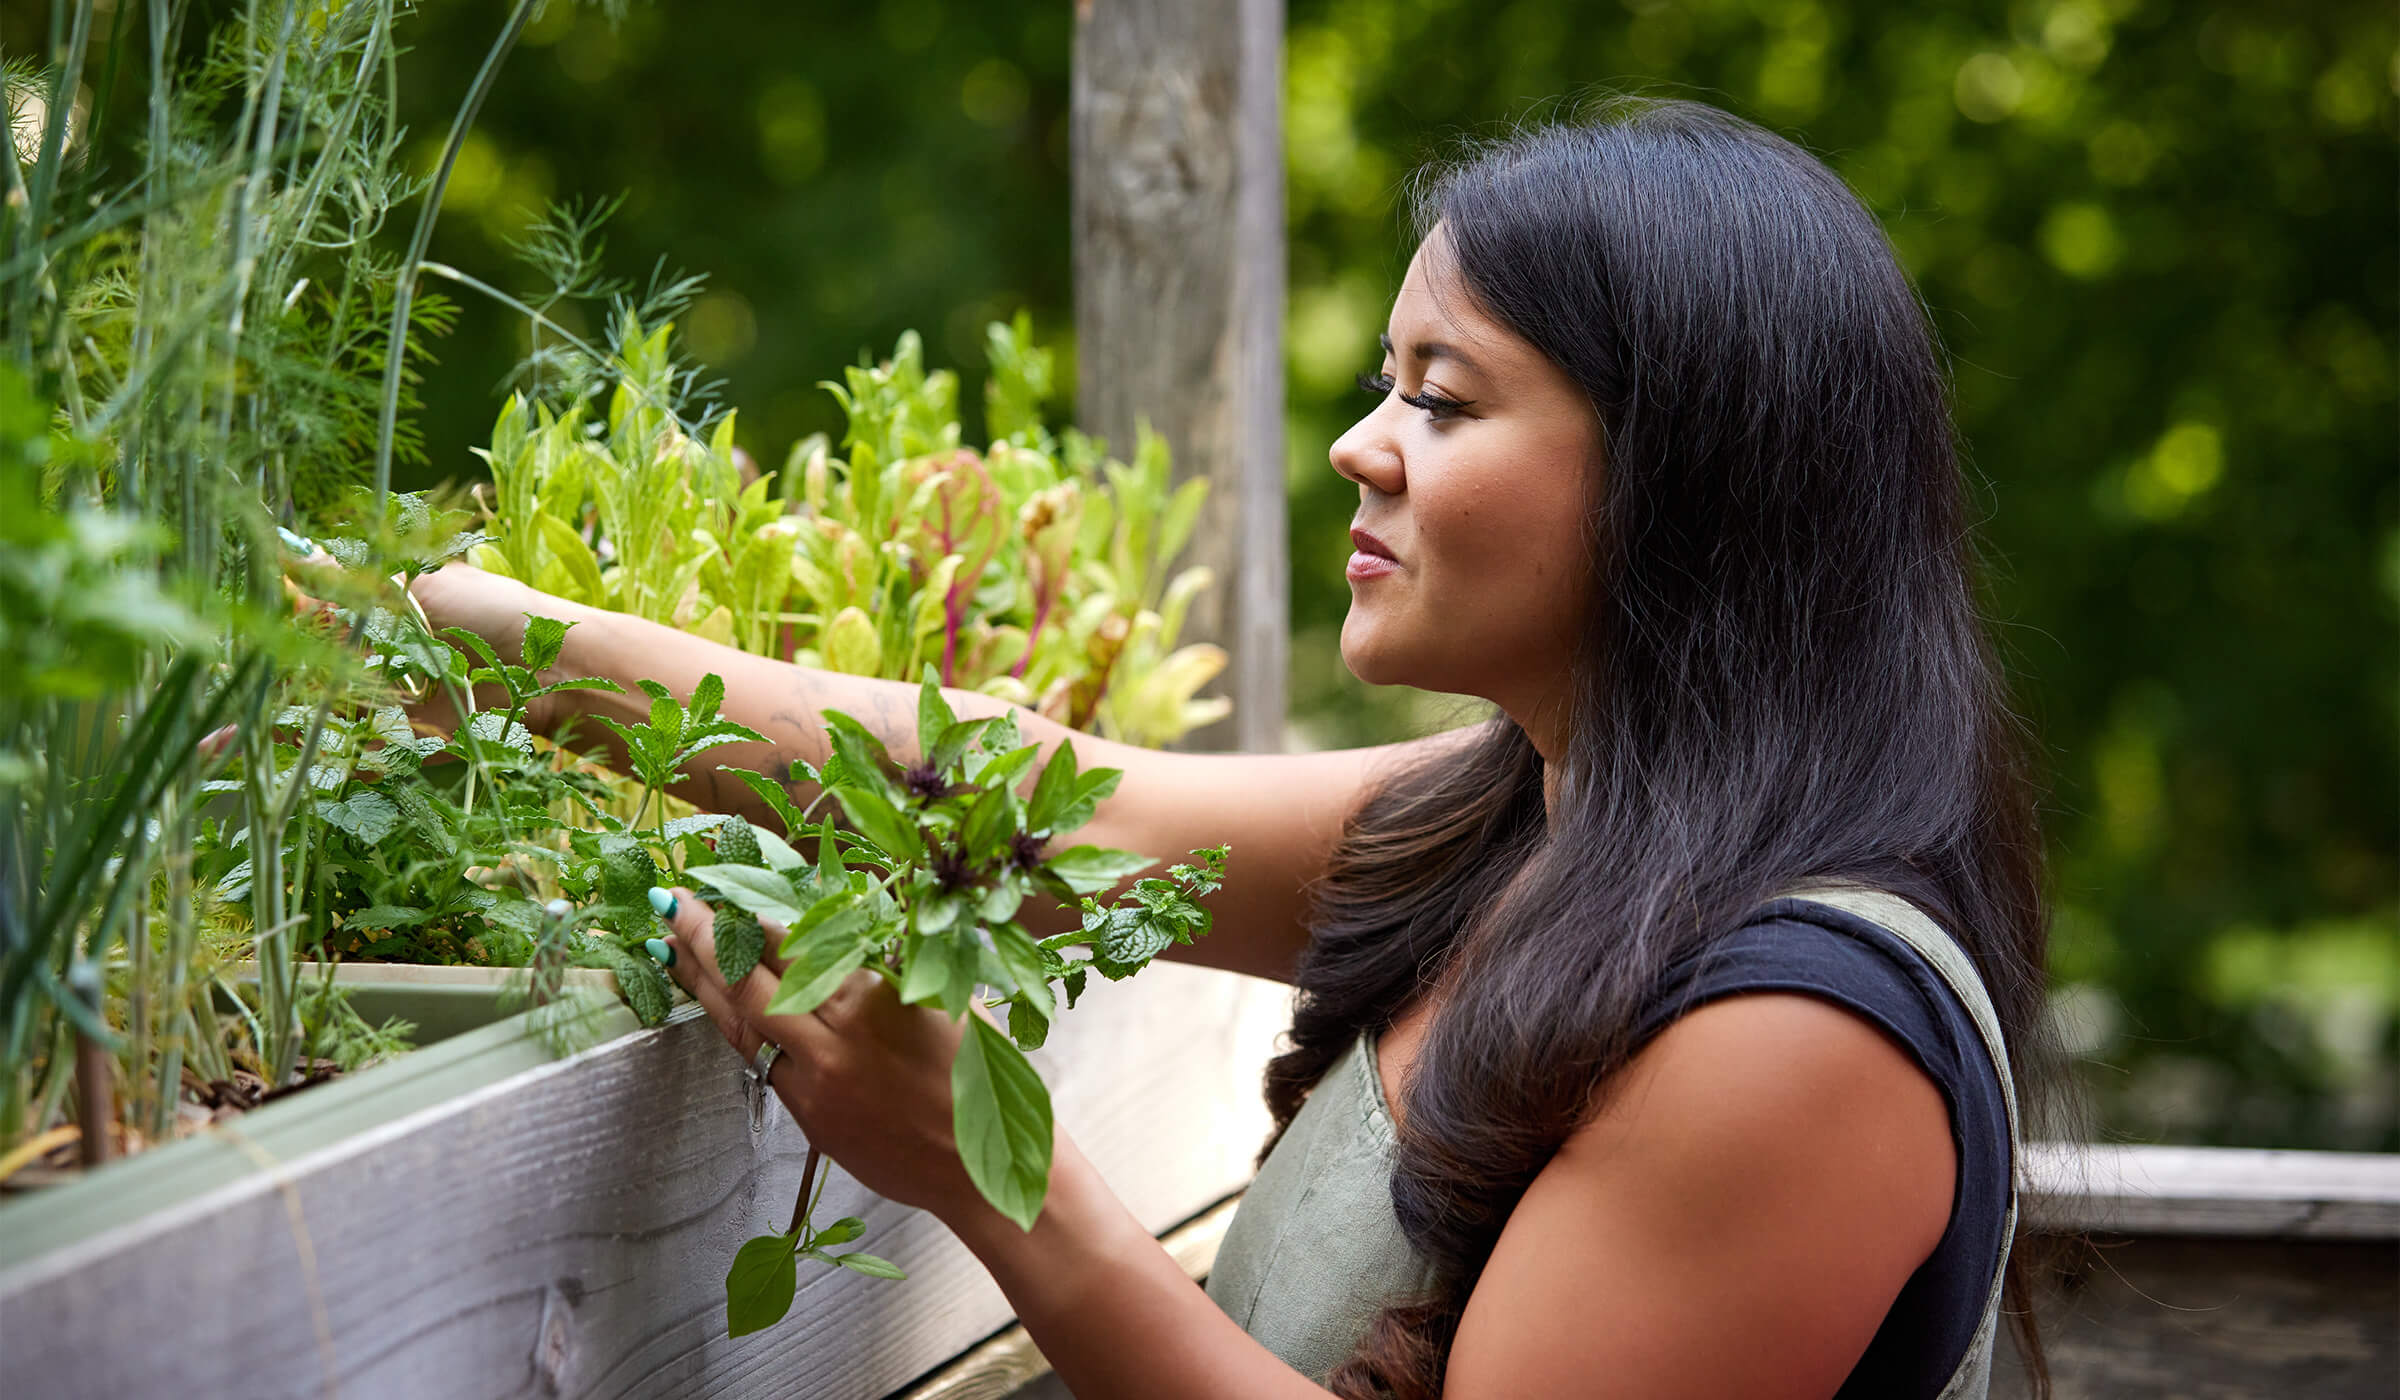 Cooking and Culture profiled chef Tiffany Alexandria in her herb garden